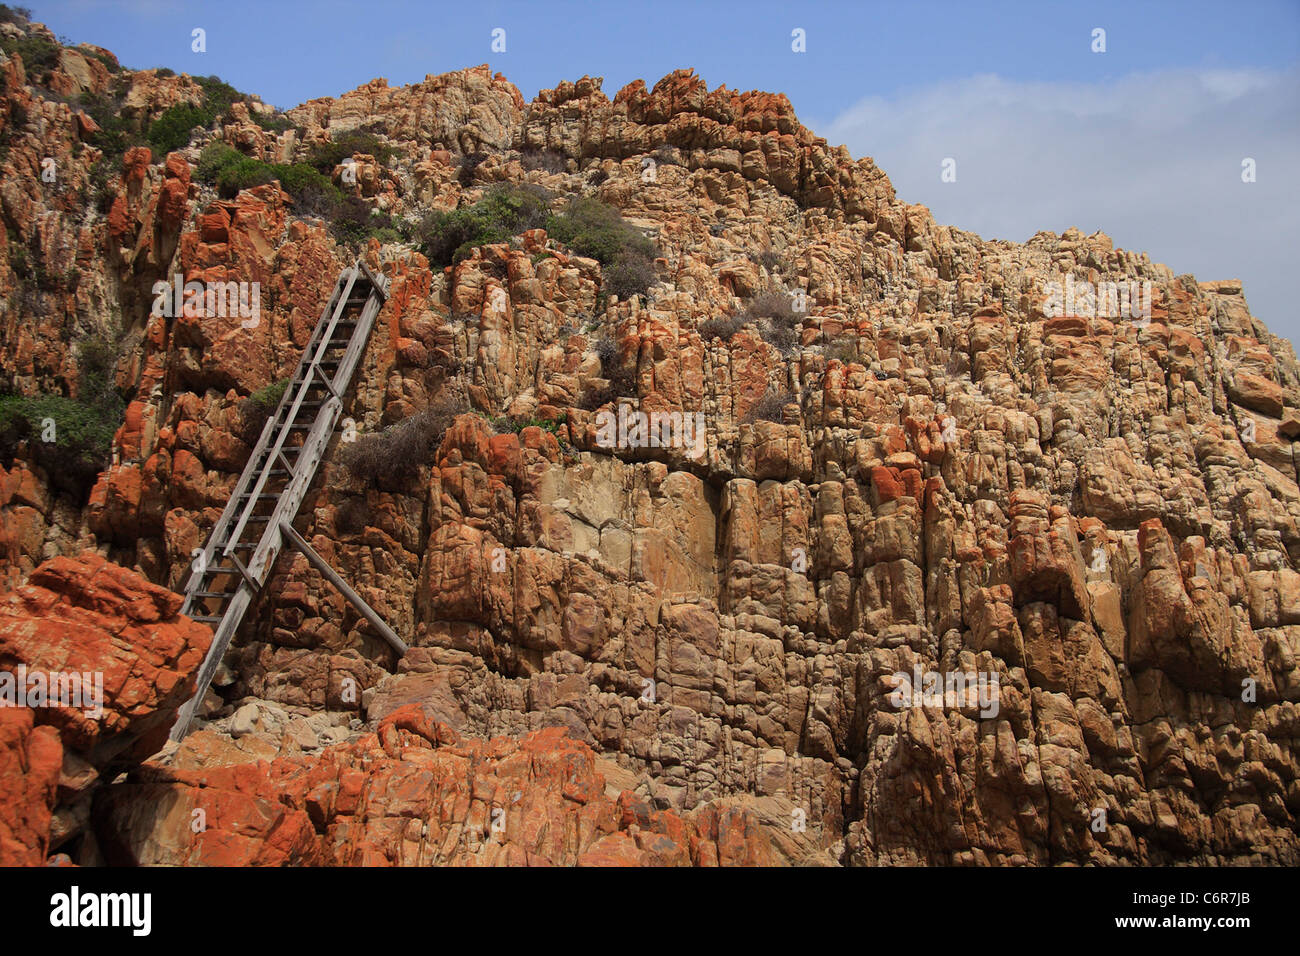 Wooden ladder going up a steep and rocky incline Stock Photo